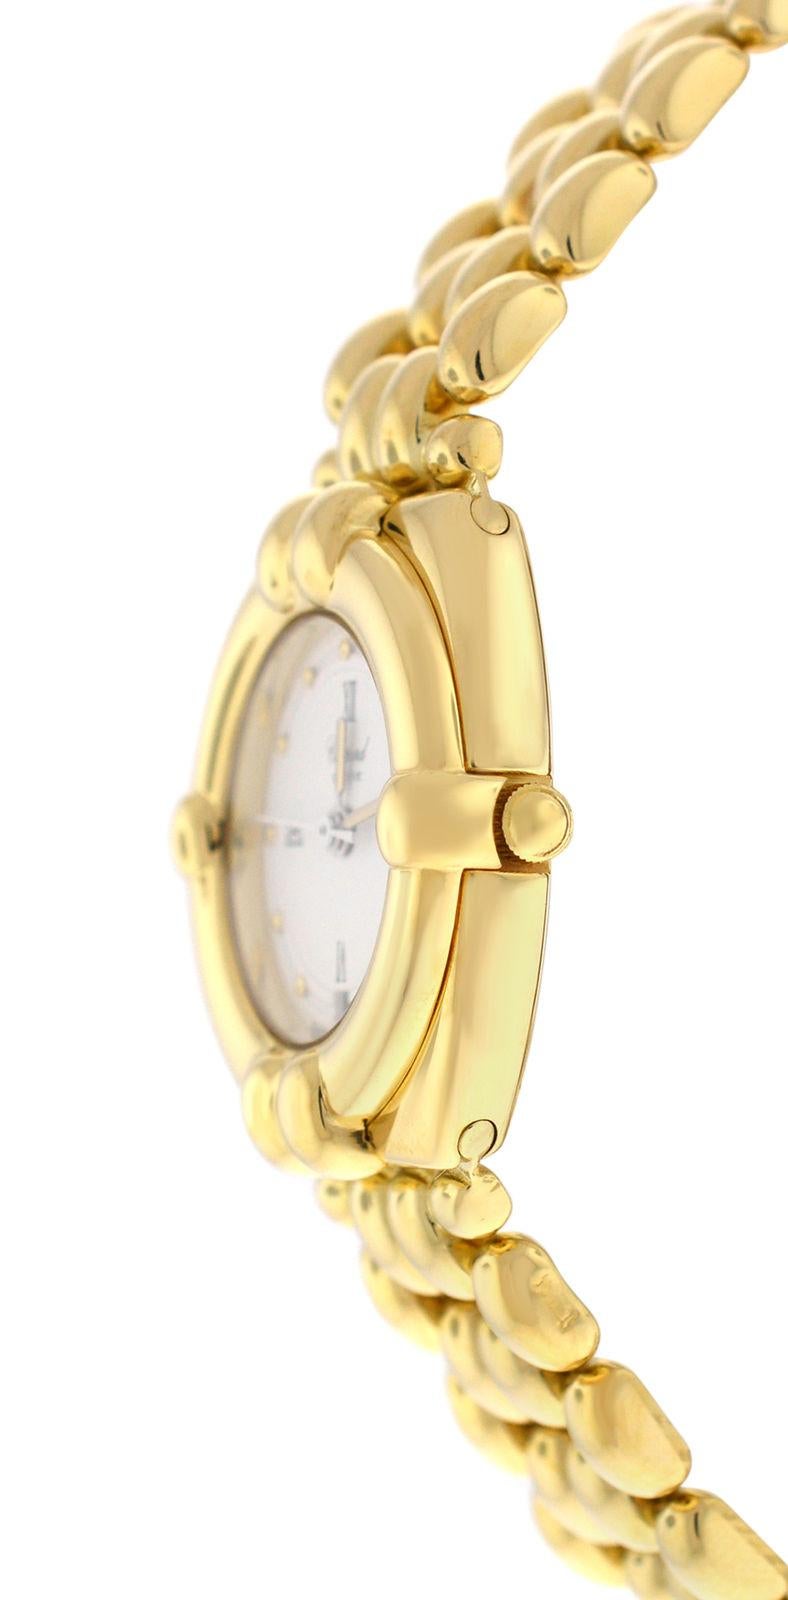 Brand	Chopard
Model	Gstaad 32/5120
Gender	Ladies
Condition	Pre-owned
Movement	Swiss Quartz
Case Material	18K Yellow Gold
Bracelet / Strap Material	
18K Yellow Gold

Clasp / Buckle Material	
18K White Gold 

Clasp Type	Butterfly Deployment
Bracelet /